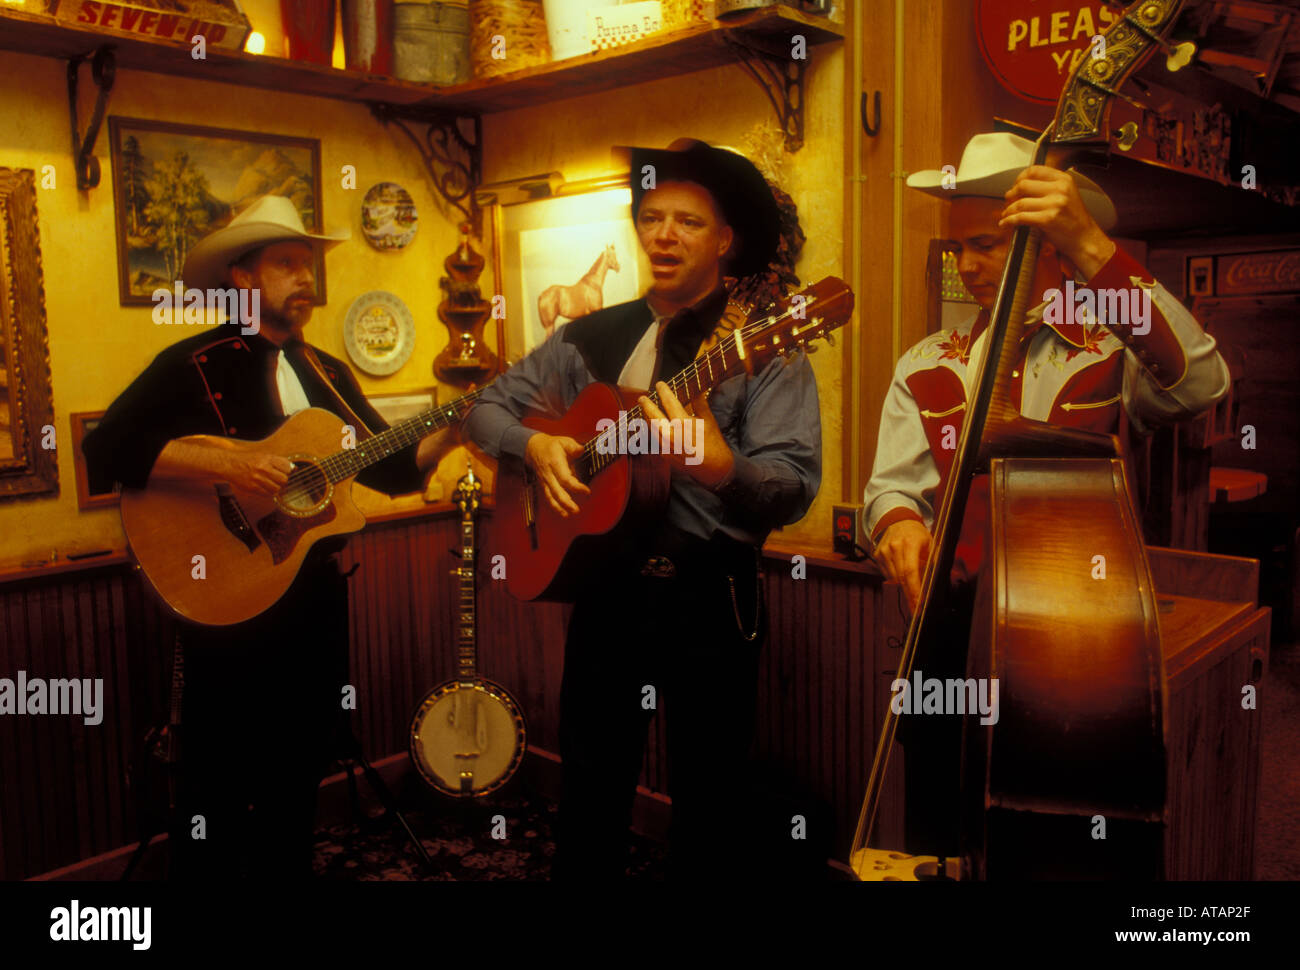 Syd Masters and the Swing Riders band, Syd Masters, Swing Riders band, country music band, trio, Albuquerque, Bernalillo County, New Mexico Stock Photo